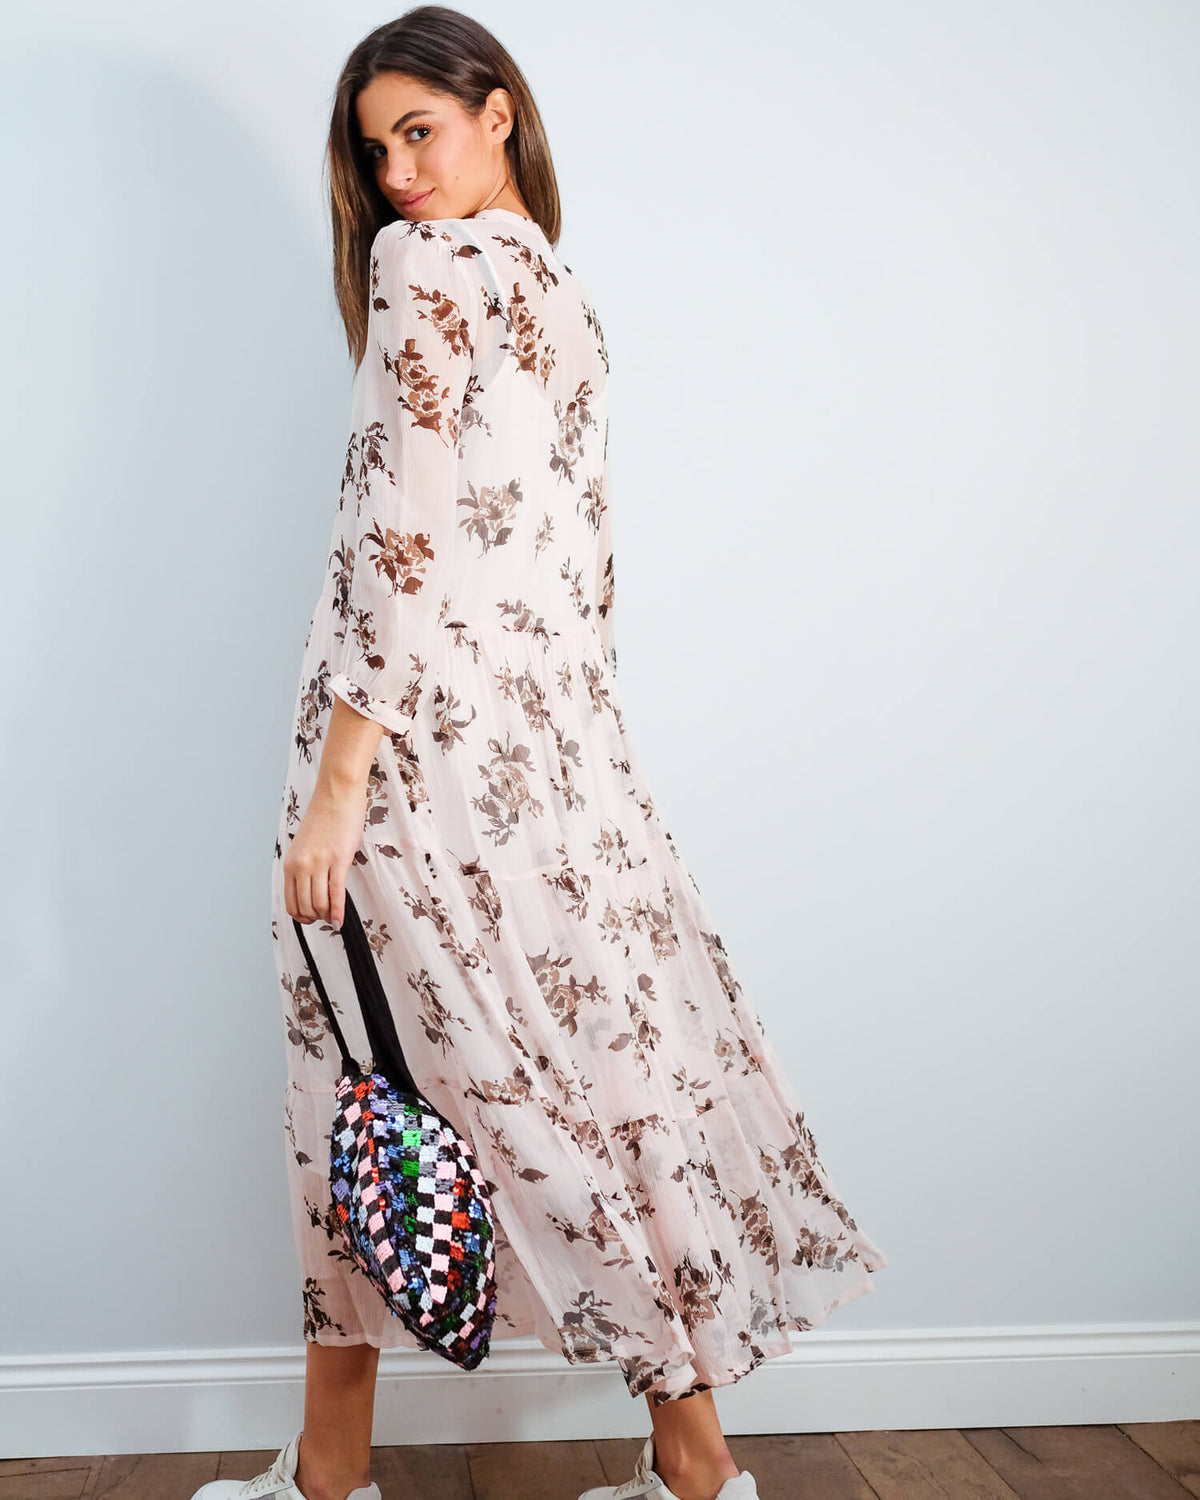 BUP Aia printed dress in peach brown rose